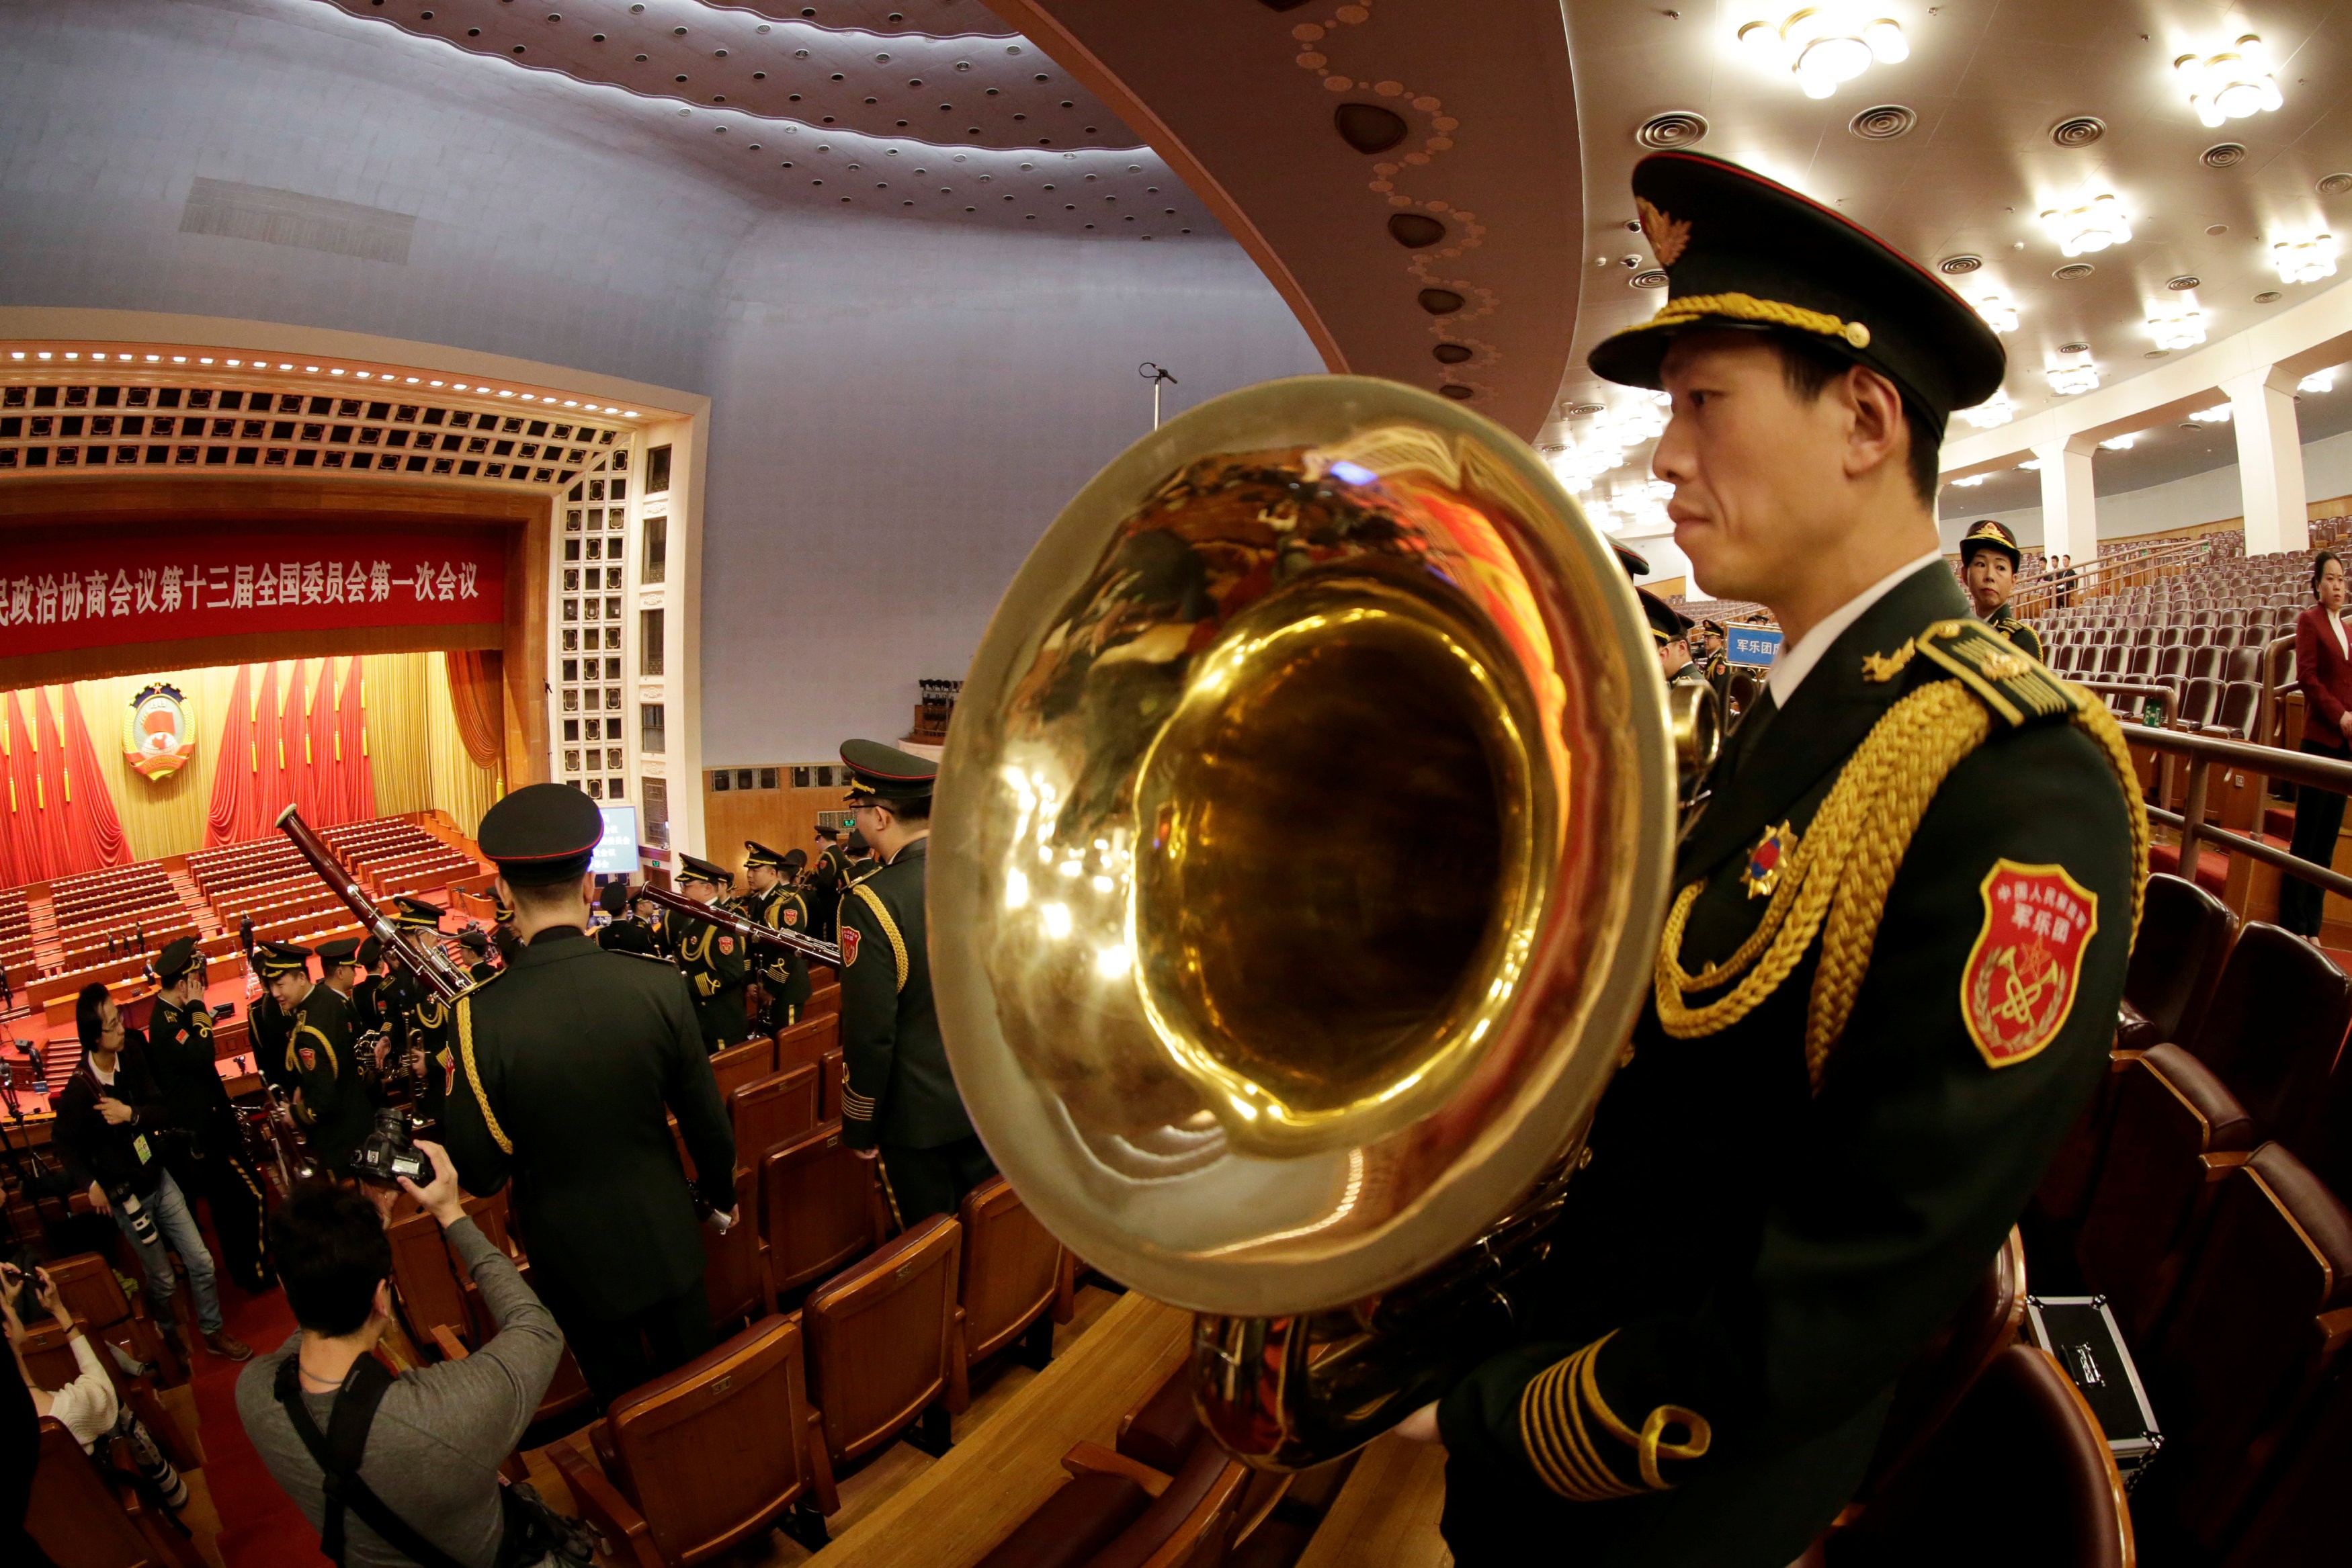 Military band members rehearse for the CPPCC opening session at the Great Hall of the People in Beijing on Saturday. Photo: Reuters